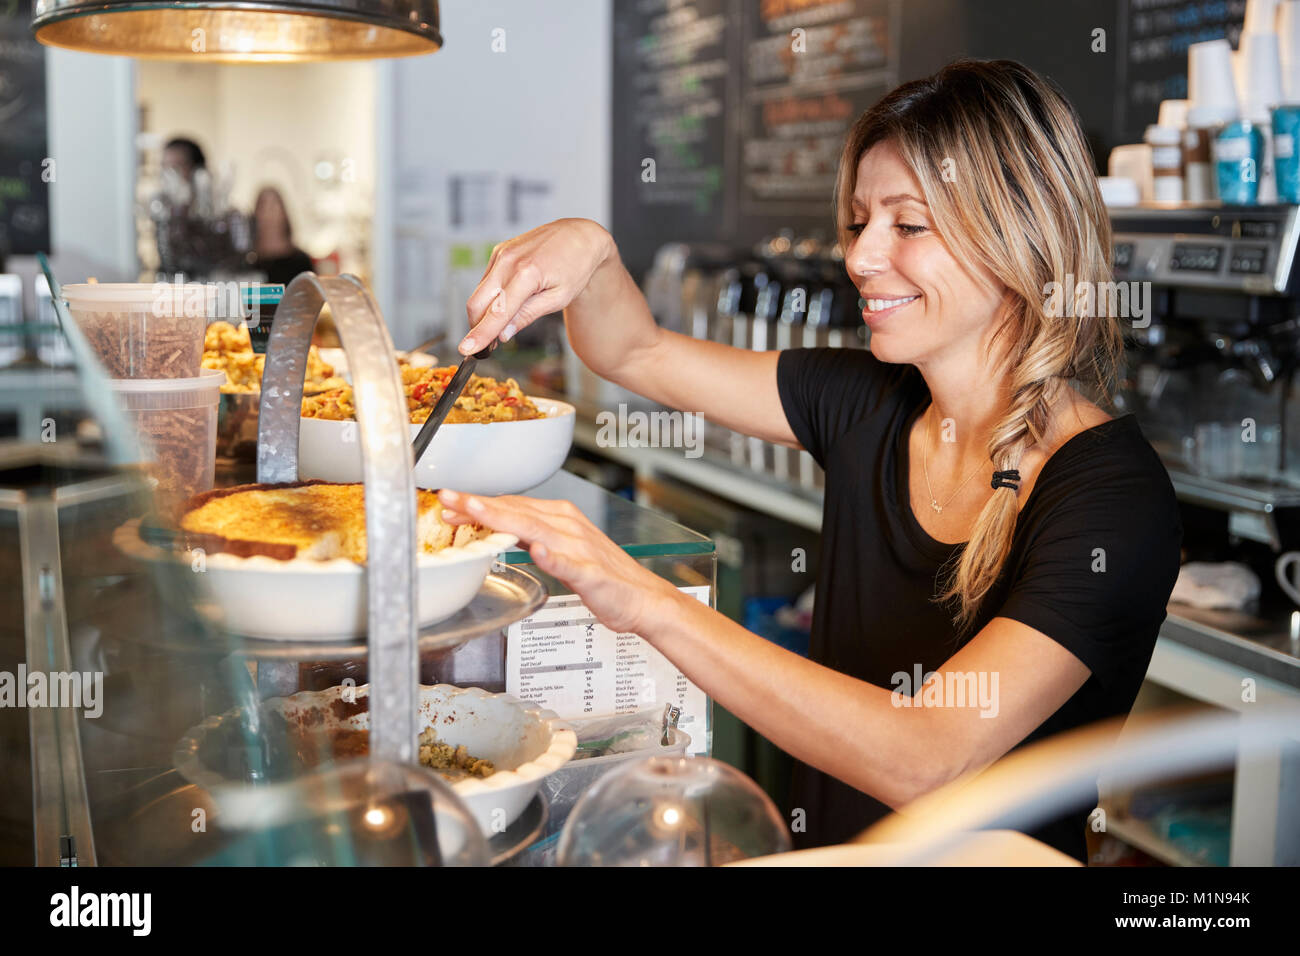 Waitress Behind Counter In Coffee Shop Cutting Slice Of Cake Stock Photo